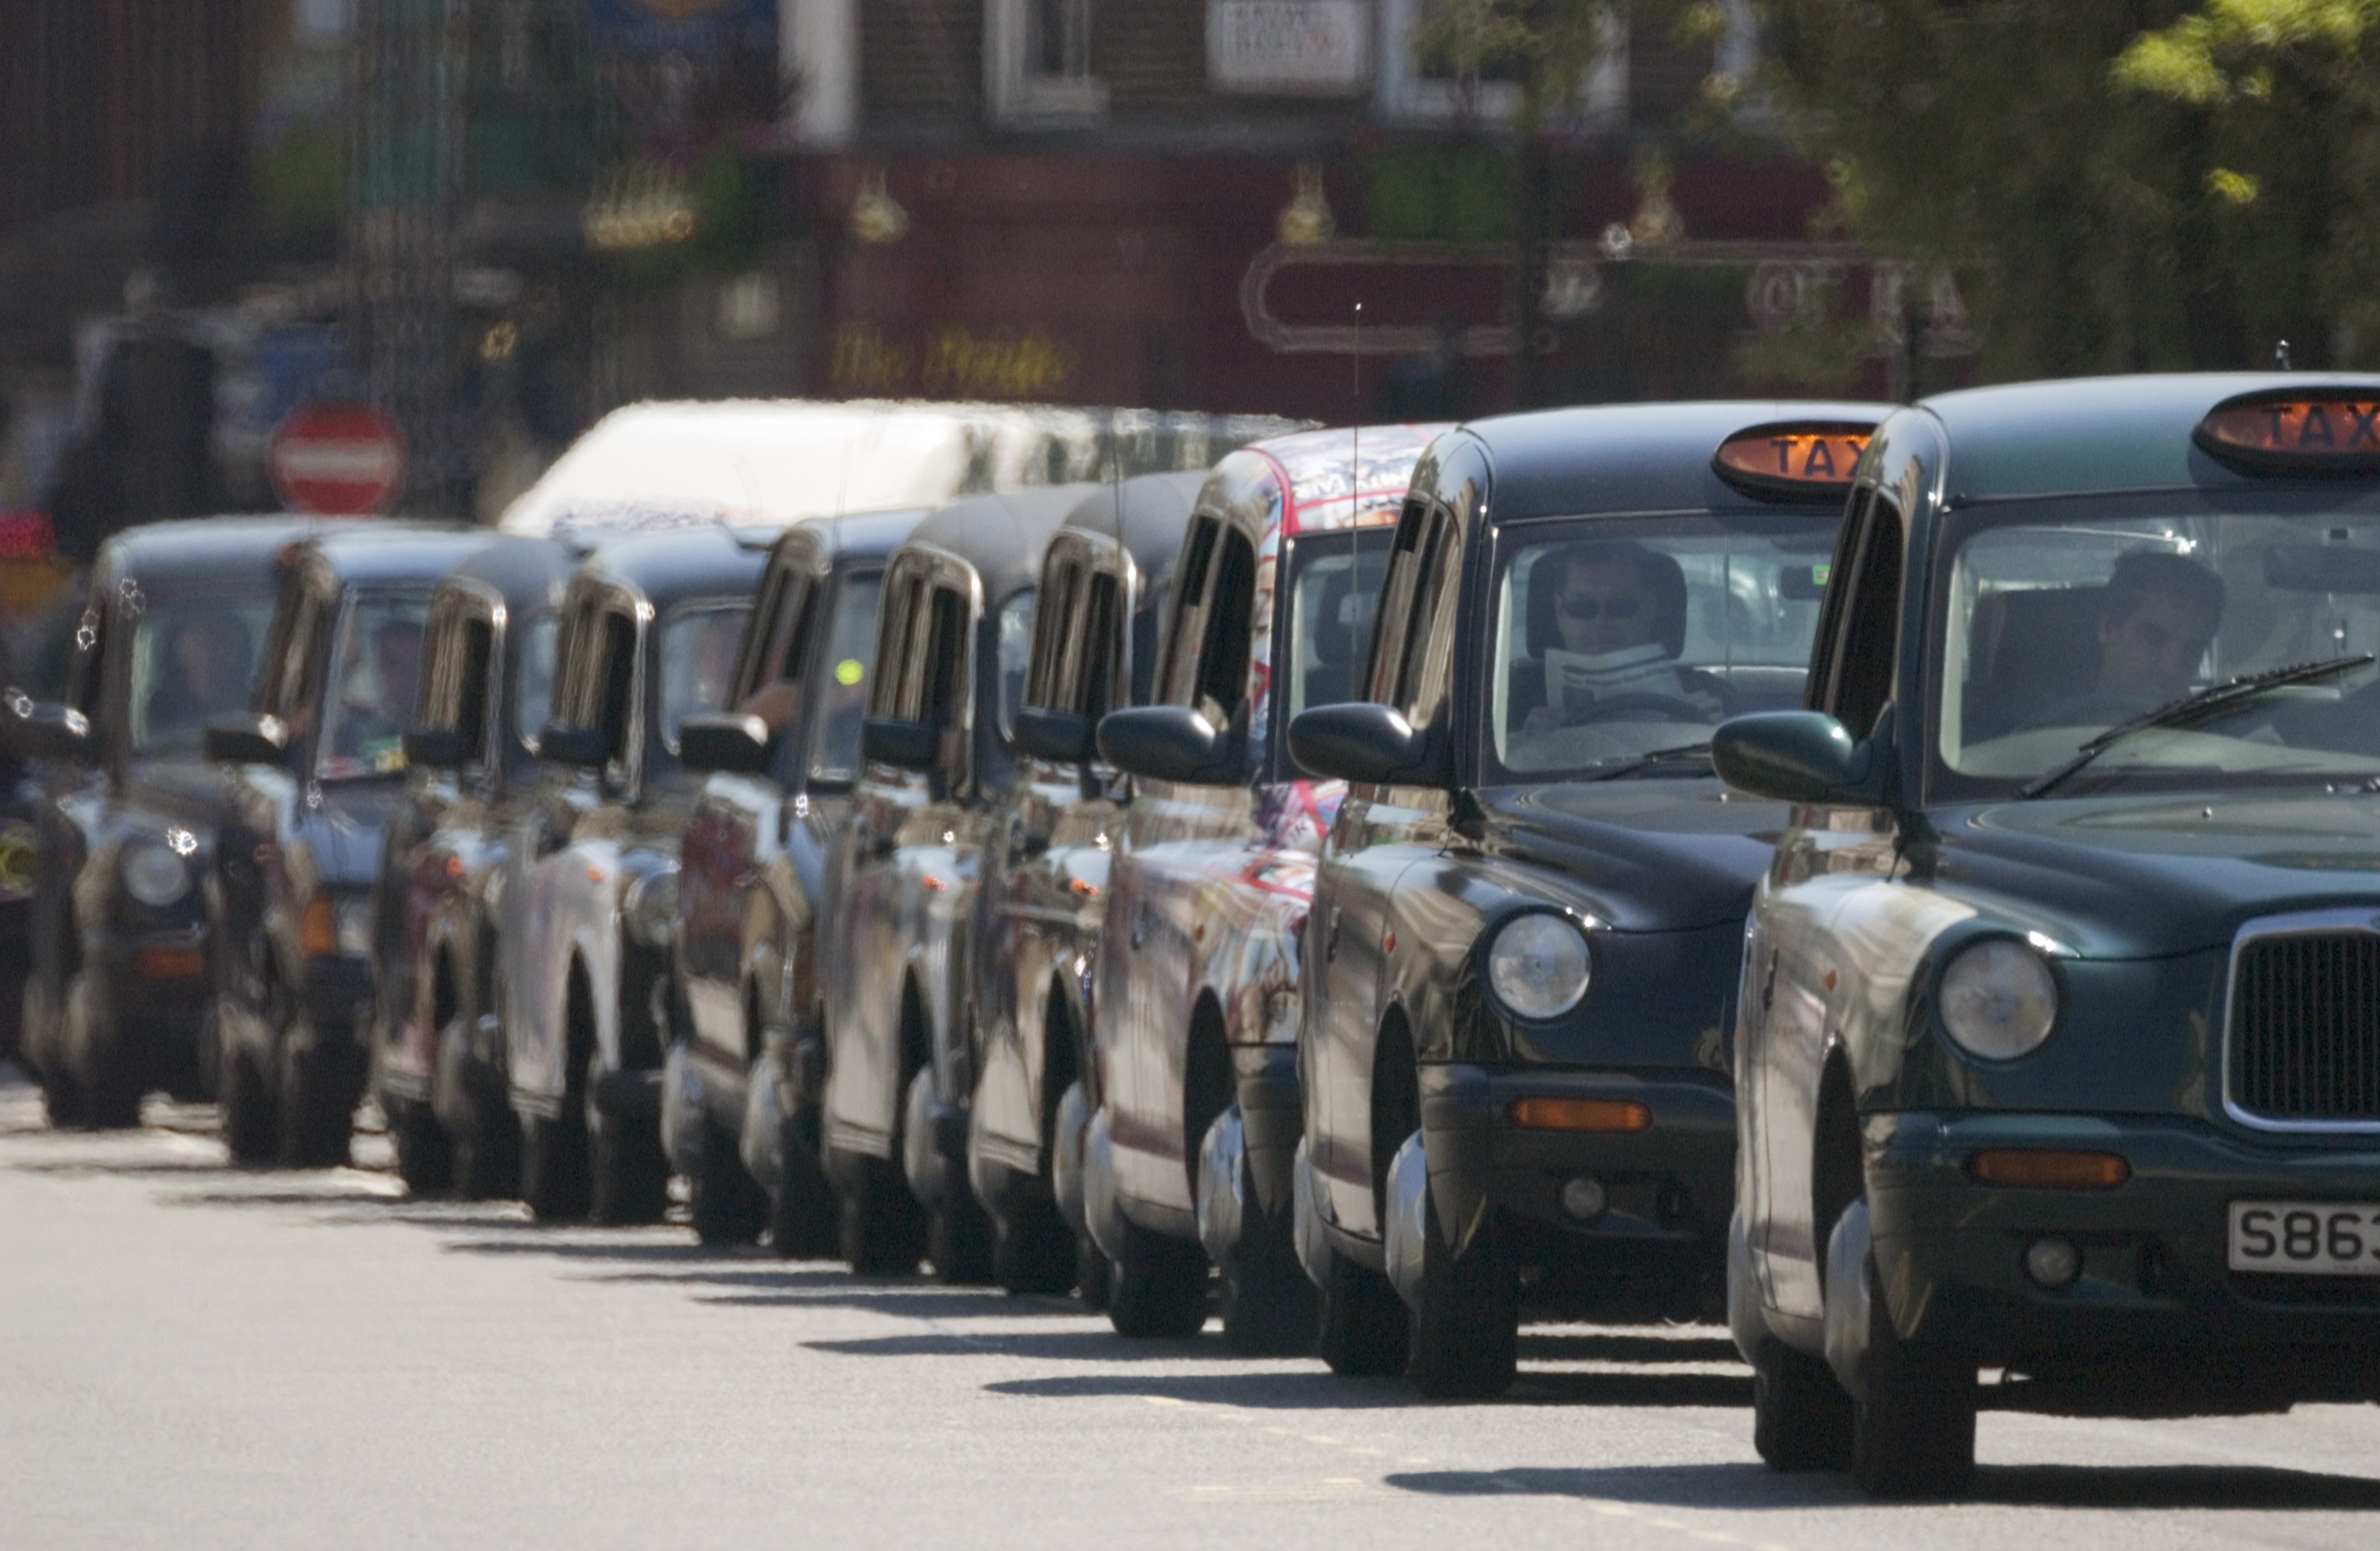 A row of black taxis parked on the side of the road